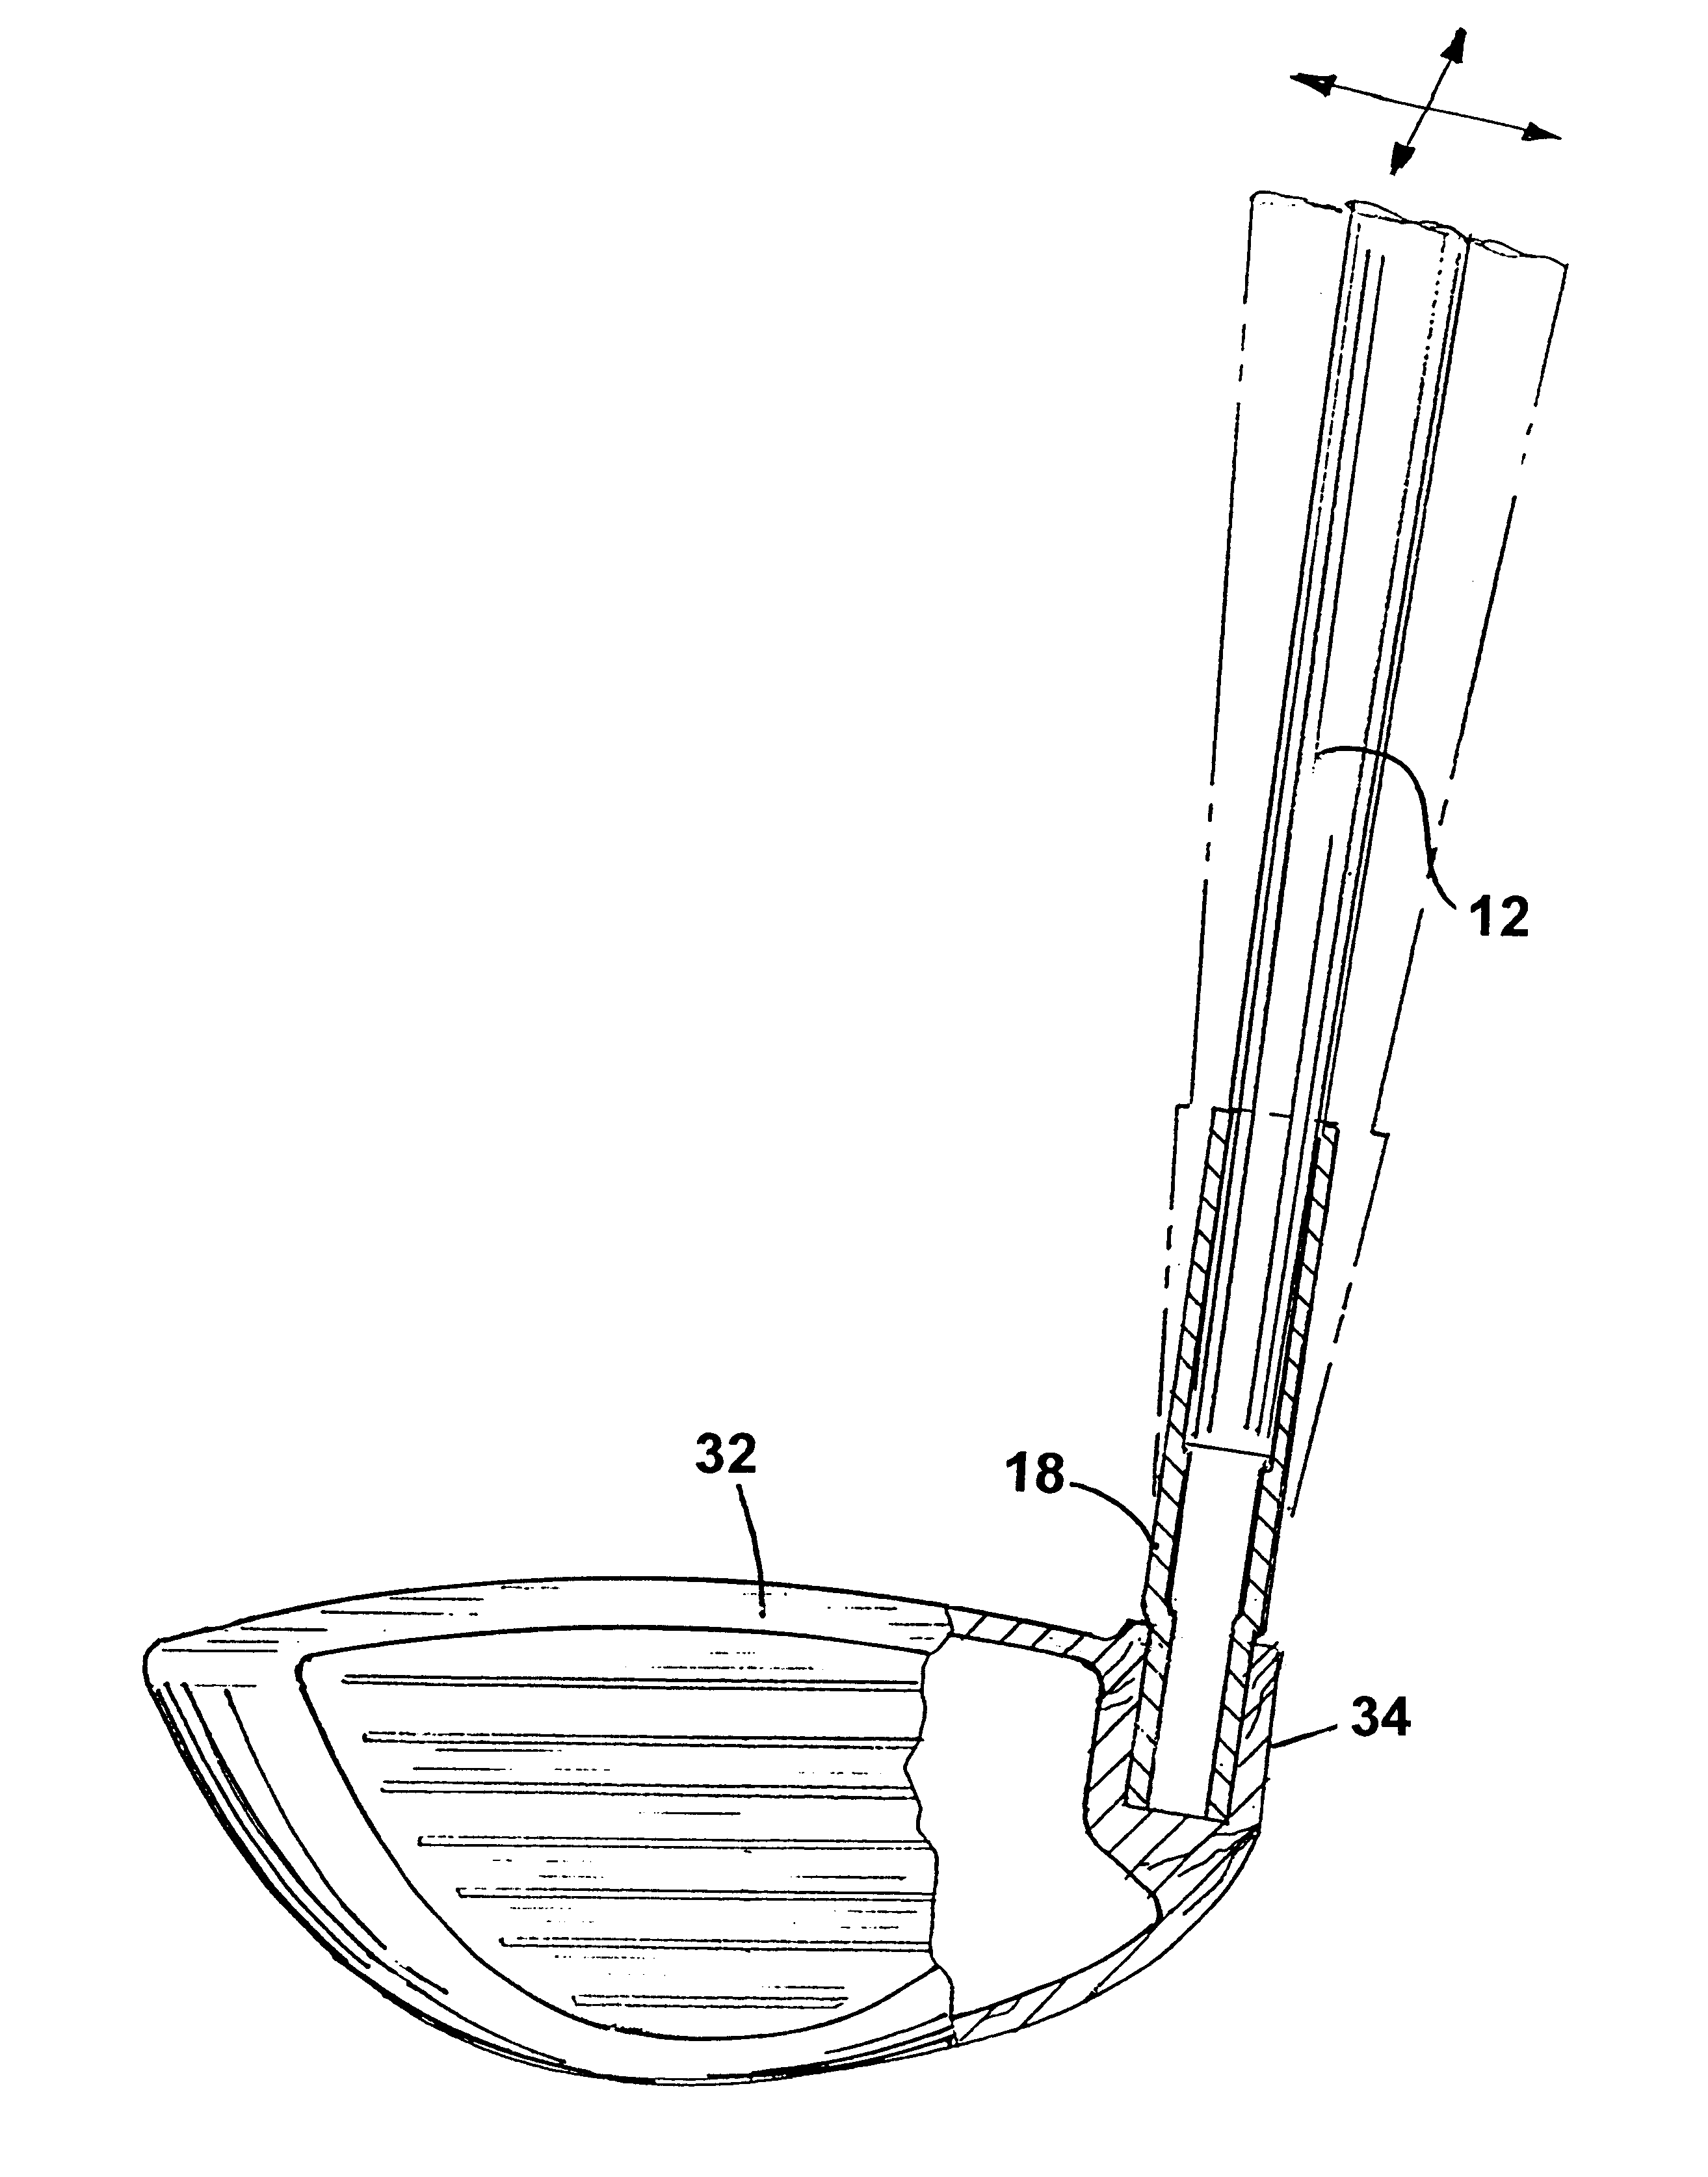 Golf club hosel interface having bendable section for customizing lie and face angles